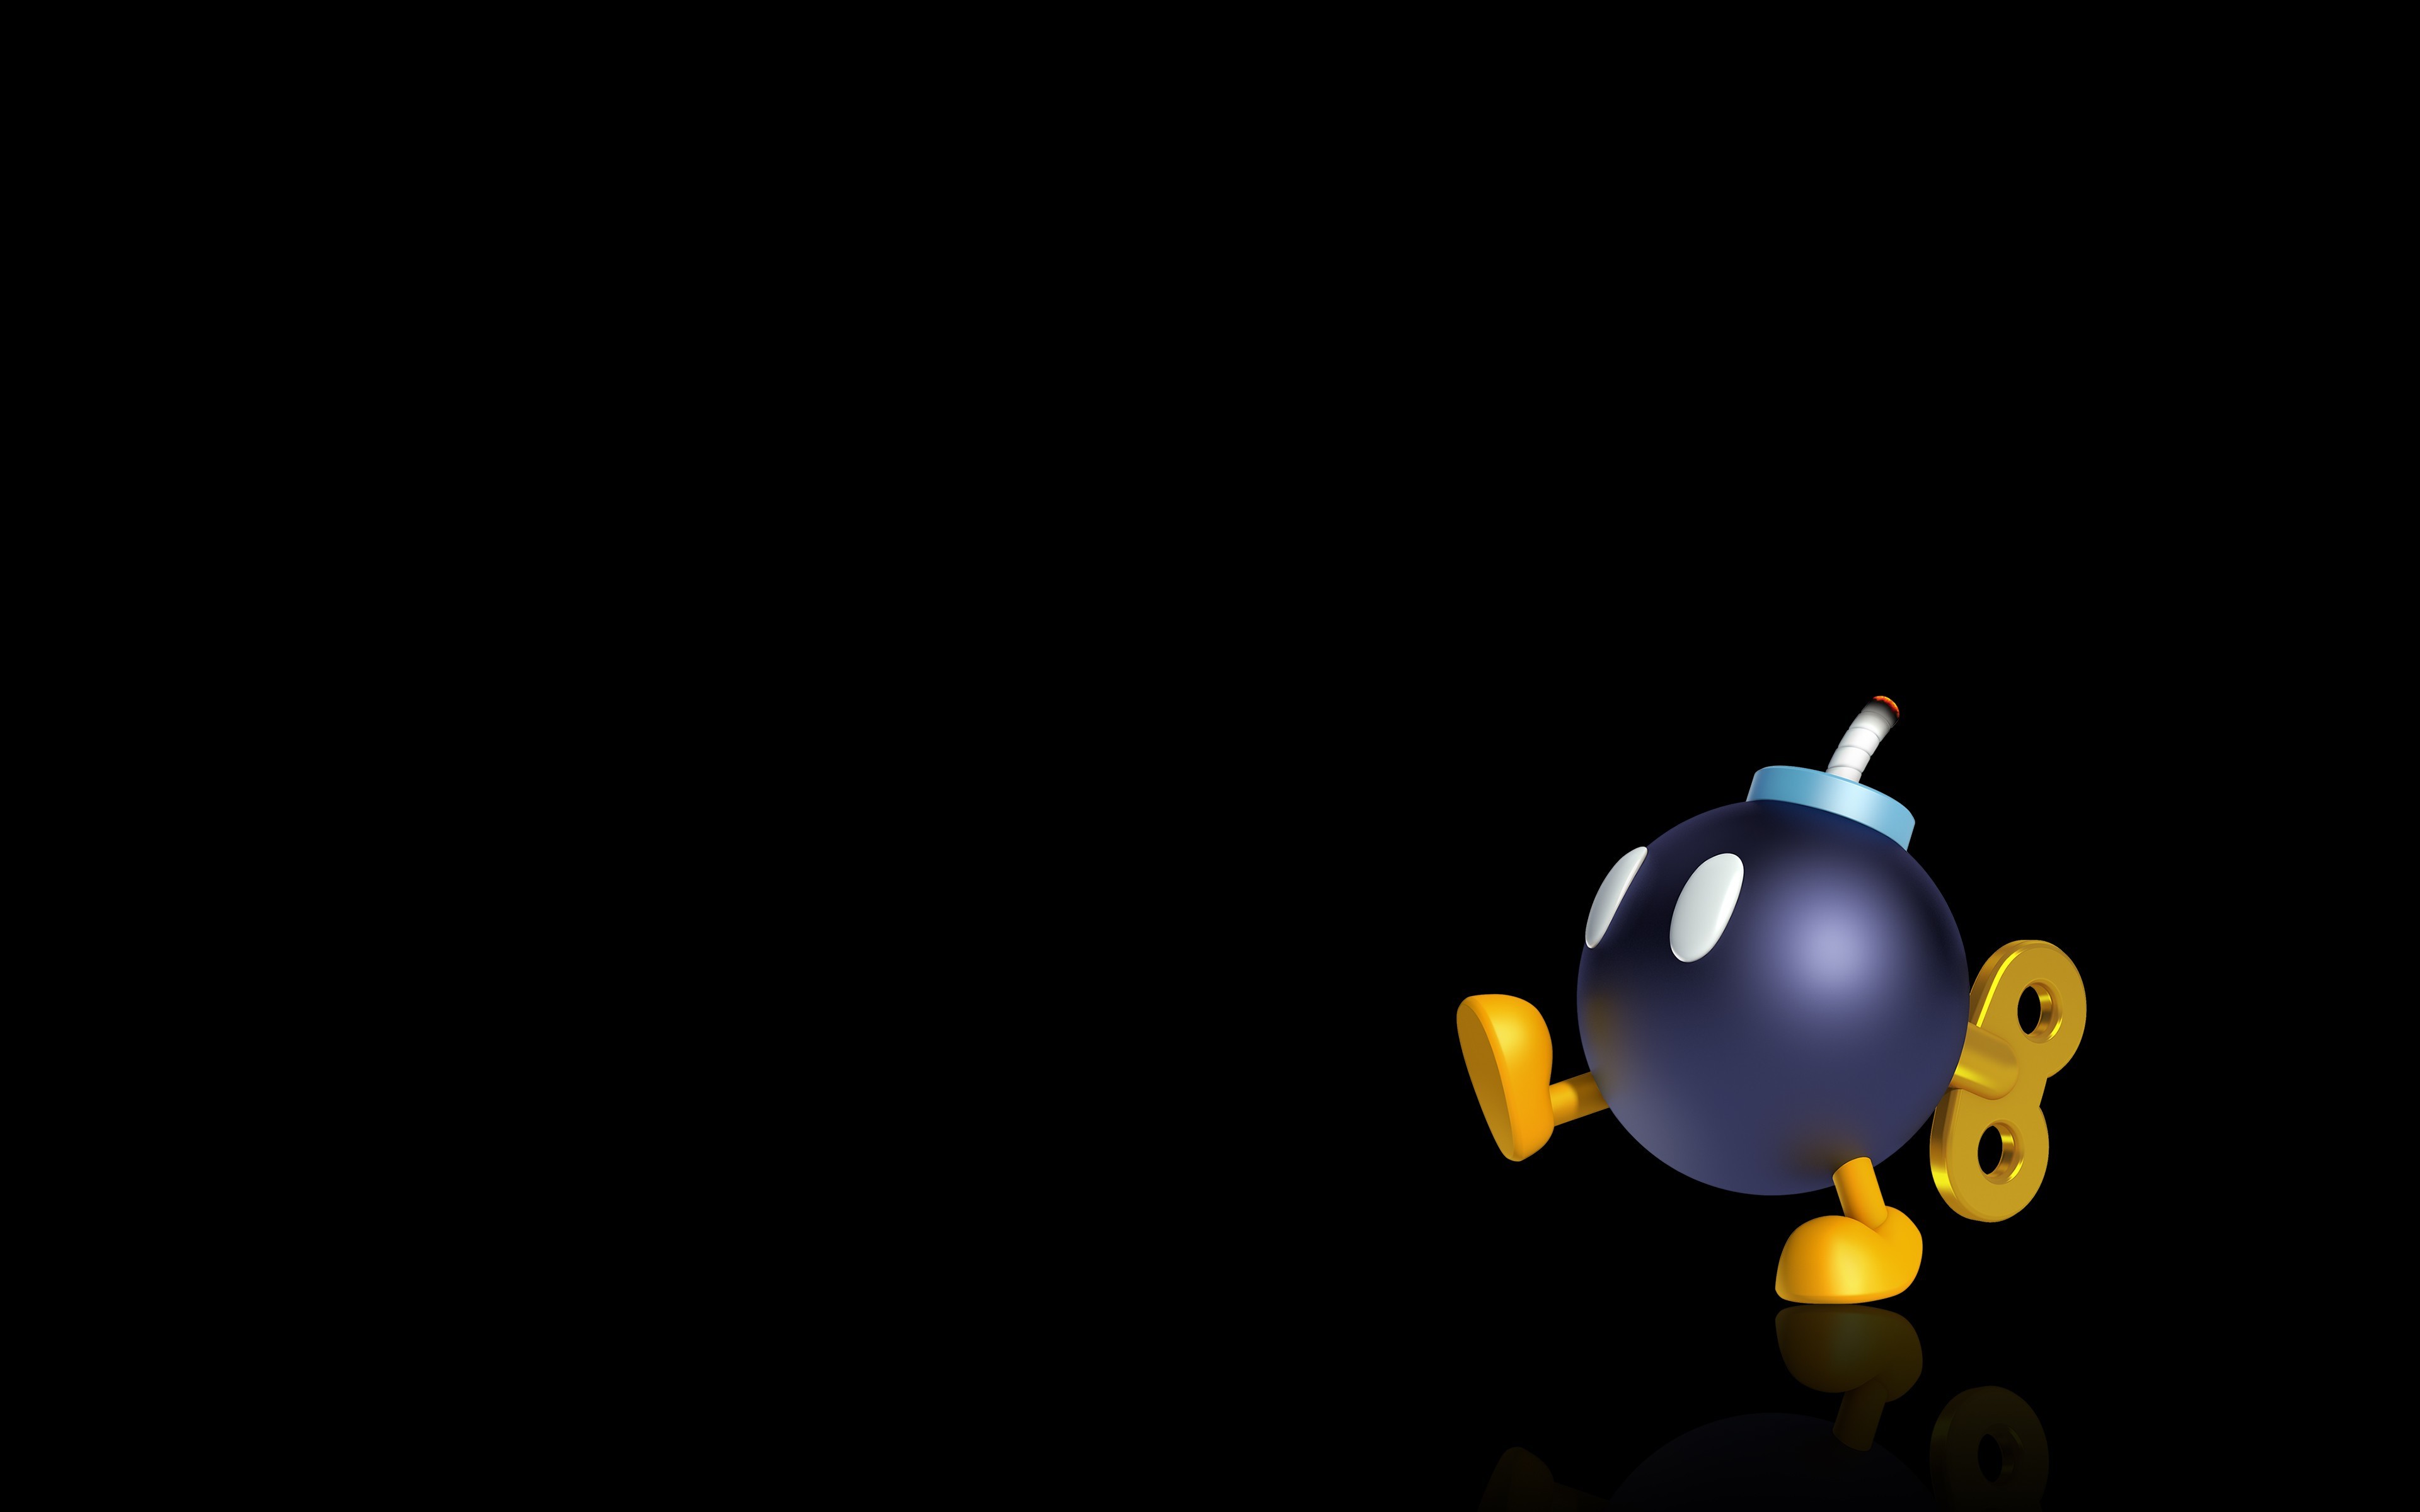 Mario Bros., Bob omb, Simple Background, Video Games Wallpaper HD / Desktop and Mobile Background